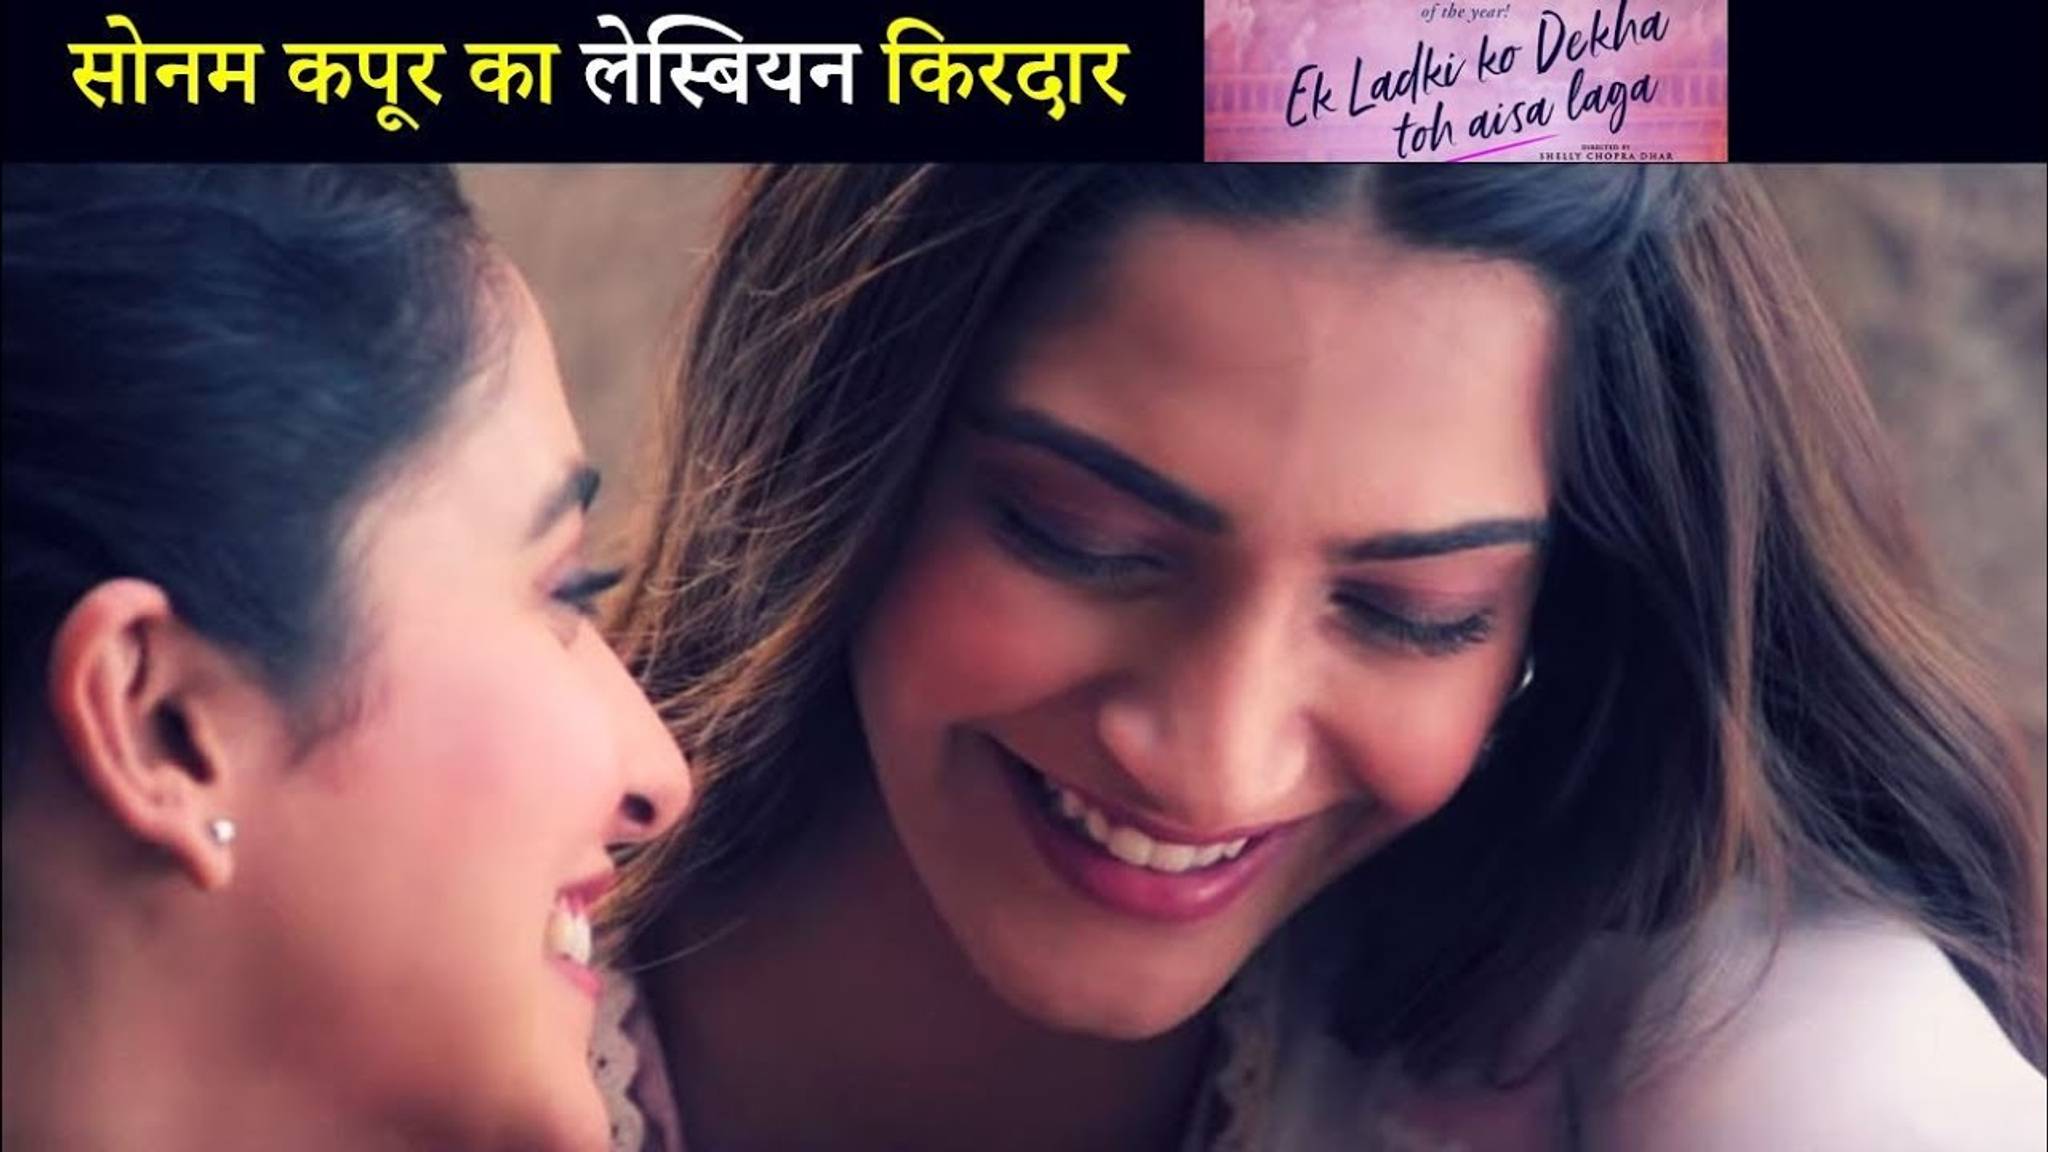 Bollywood's first lesbian film normalises LGBT culture